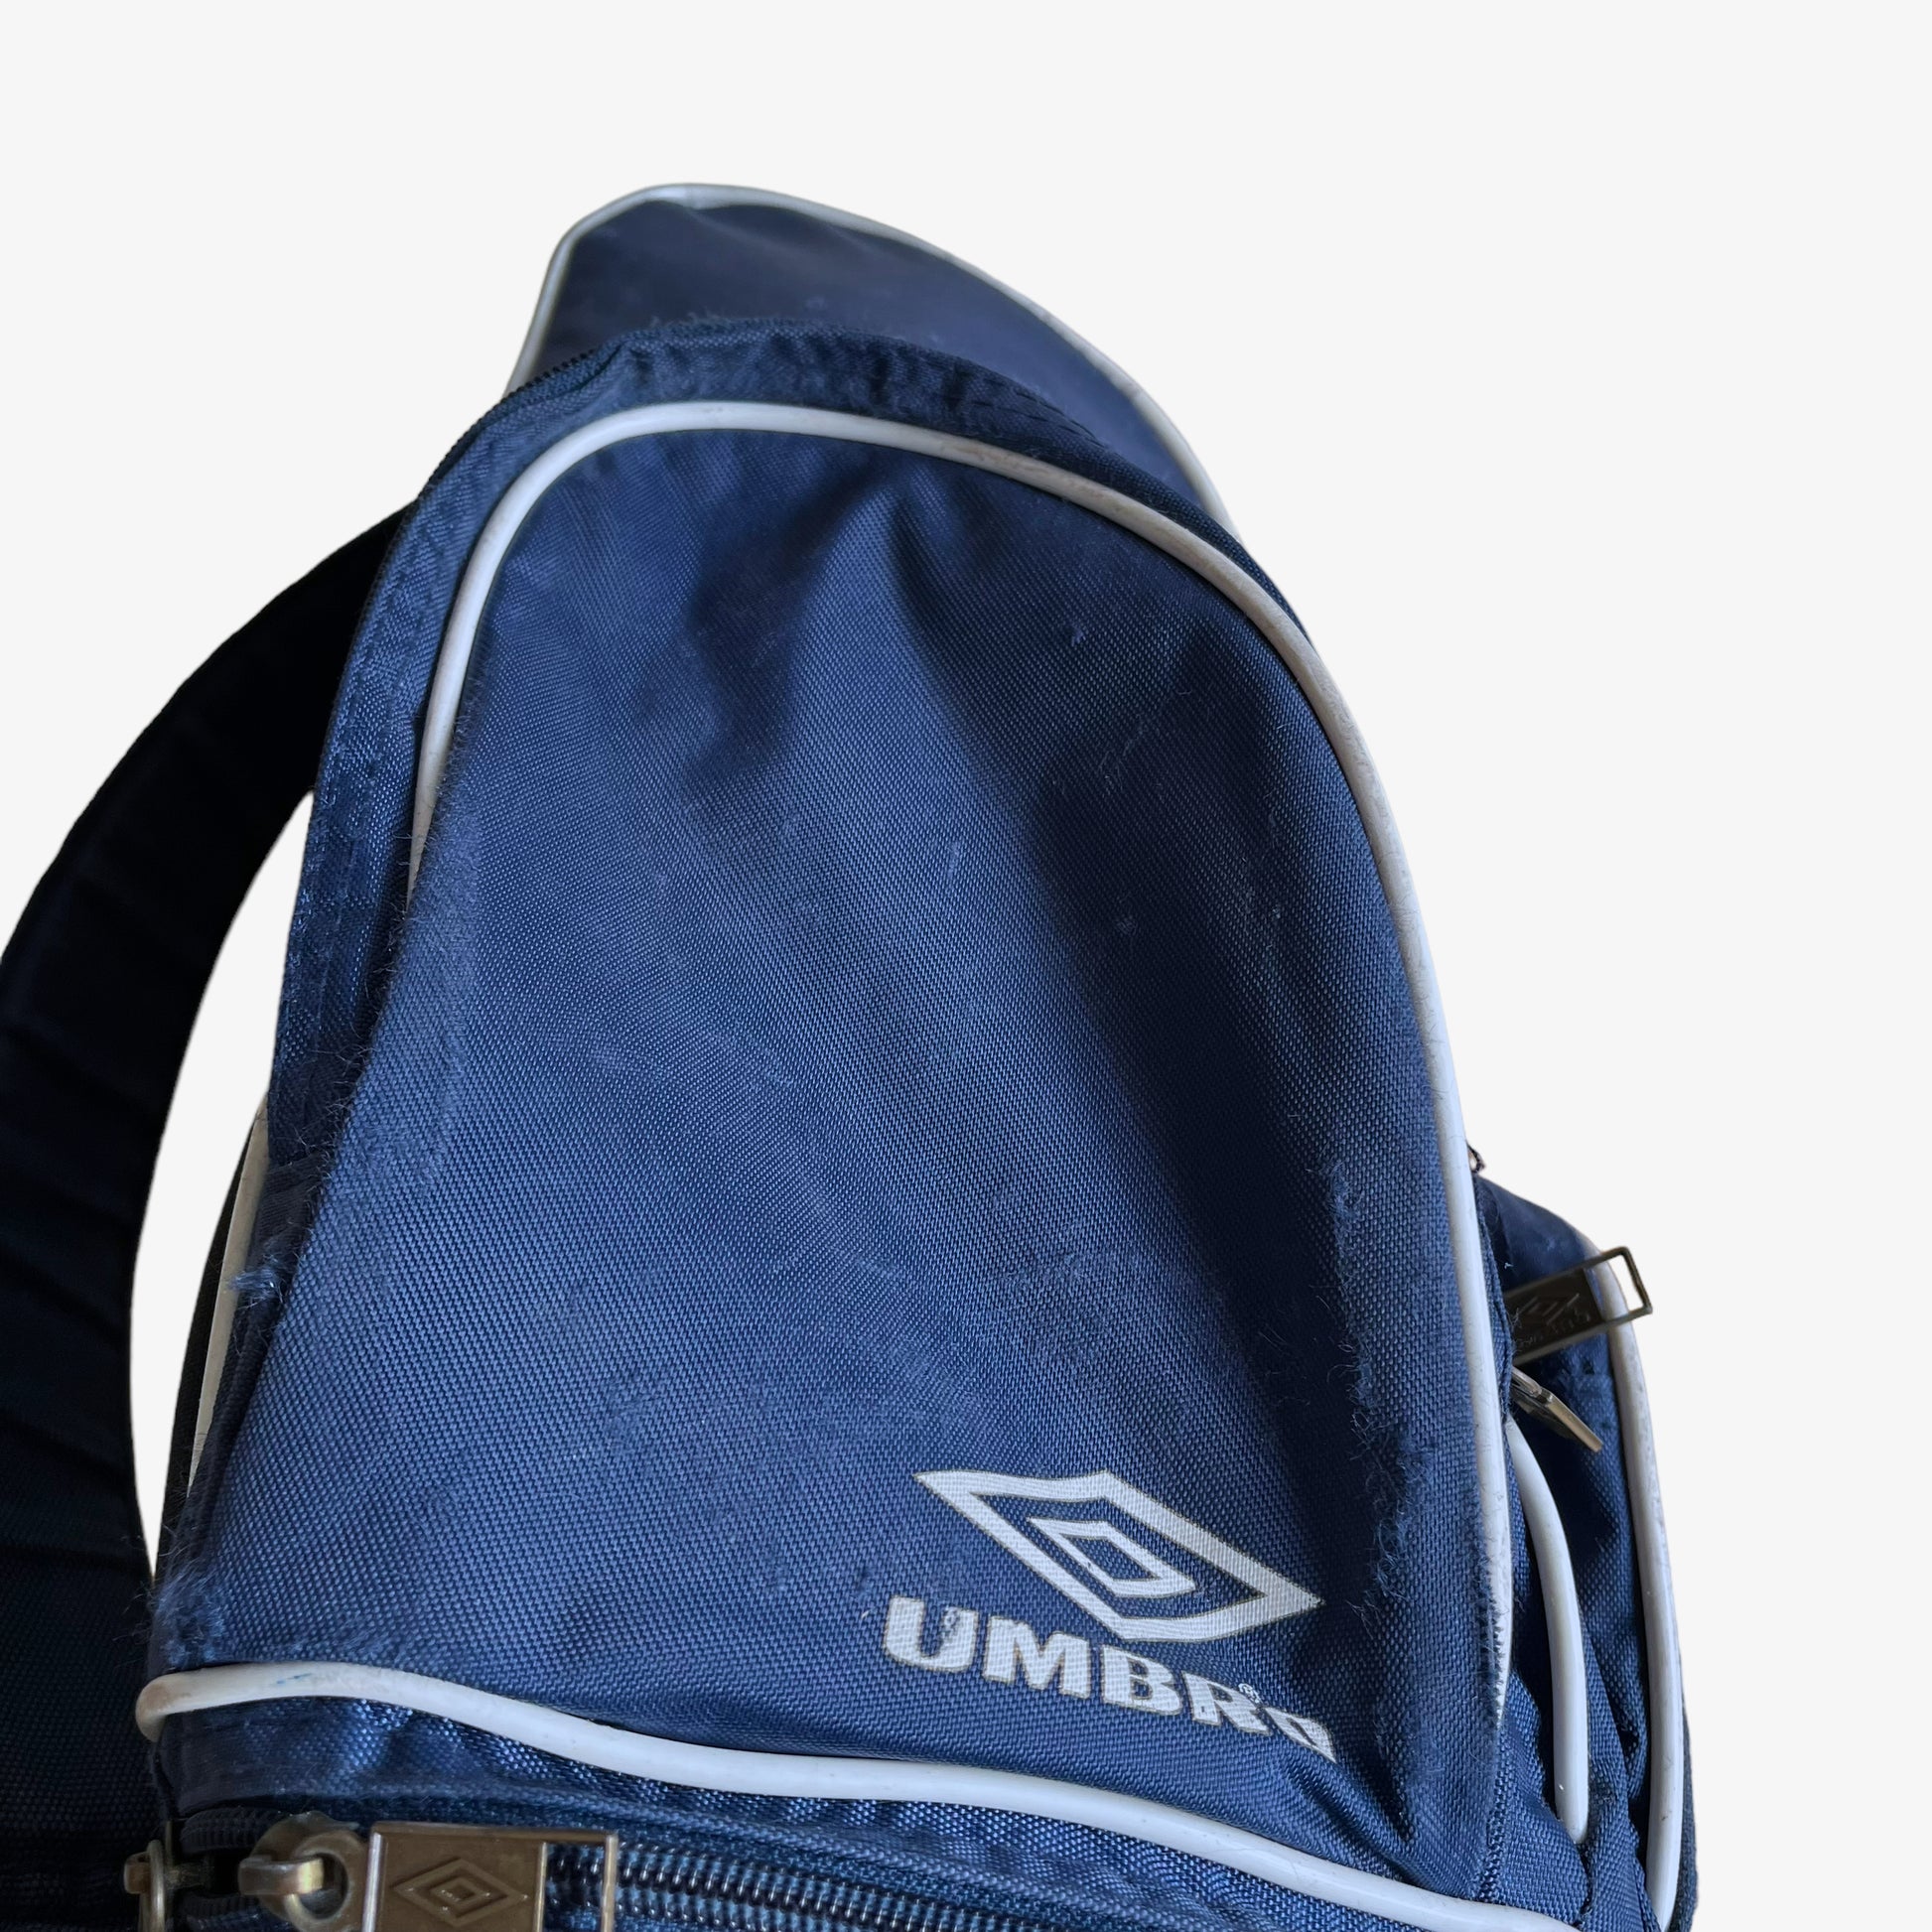 Vintage 90s Umbro Sports Big Blue Backpack Featuring An Embroidered Spell Out Logo Side - Casspios Dream